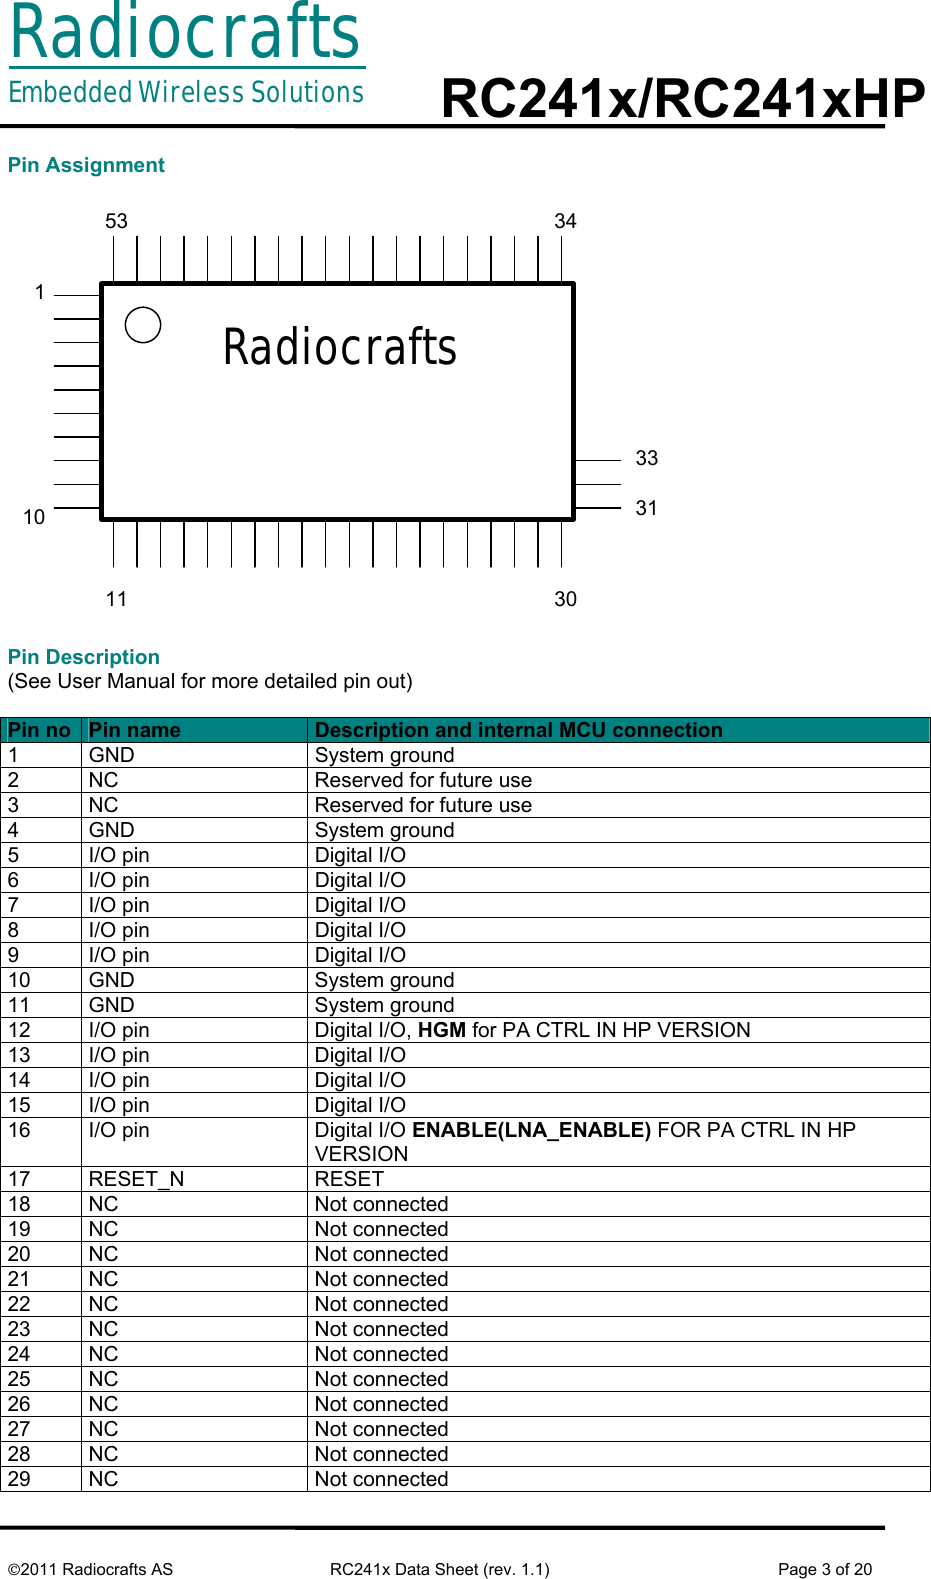 RadiocraftsEmbedded Wireless Solutions  RC241x/RC241xHP     ©2011 Radiocrafts AS  RC241x Data Sheet (rev. 1.1)  Page 3 of 20  Pin Assignment  Radiocrafts11011 30333153 34  Pin Description (See User Manual for more detailed pin out)  Pin no  Pin name  Description and internal MCU connection 1 GND  System ground 2  NC  Reserved for future use 3  NC  Reserved for future use 4 GND  System ground 5  I/O pin  Digital I/O 6  I/O pin  Digital I/O 7  I/O pin  Digital I/O 8  I/O pin  Digital I/O 9  I/O pin  Digital I/O 10 GND  System ground 11 GND  System ground 12  I/O pin  Digital I/O, HGM for PA CTRL IN HP VERSION 13  I/O pin  Digital I/O 14  I/O pin  Digital I/O 15  I/O pin  Digital I/O 16  I/O pin  Digital I/O ENABLE(LNA_ENABLE) FOR PA CTRL IN HP VERSION 17 RESET_N  RESET 18 NC  Not connected 19 NC  Not connected 20 NC  Not connected 21 NC  Not connected 22 NC  Not connected 23 NC  Not connected 24 NC  Not connected 25 NC  Not connected 26 NC  Not connected 27 NC  Not connected 28 NC  Not connected 29 NC  Not connected 